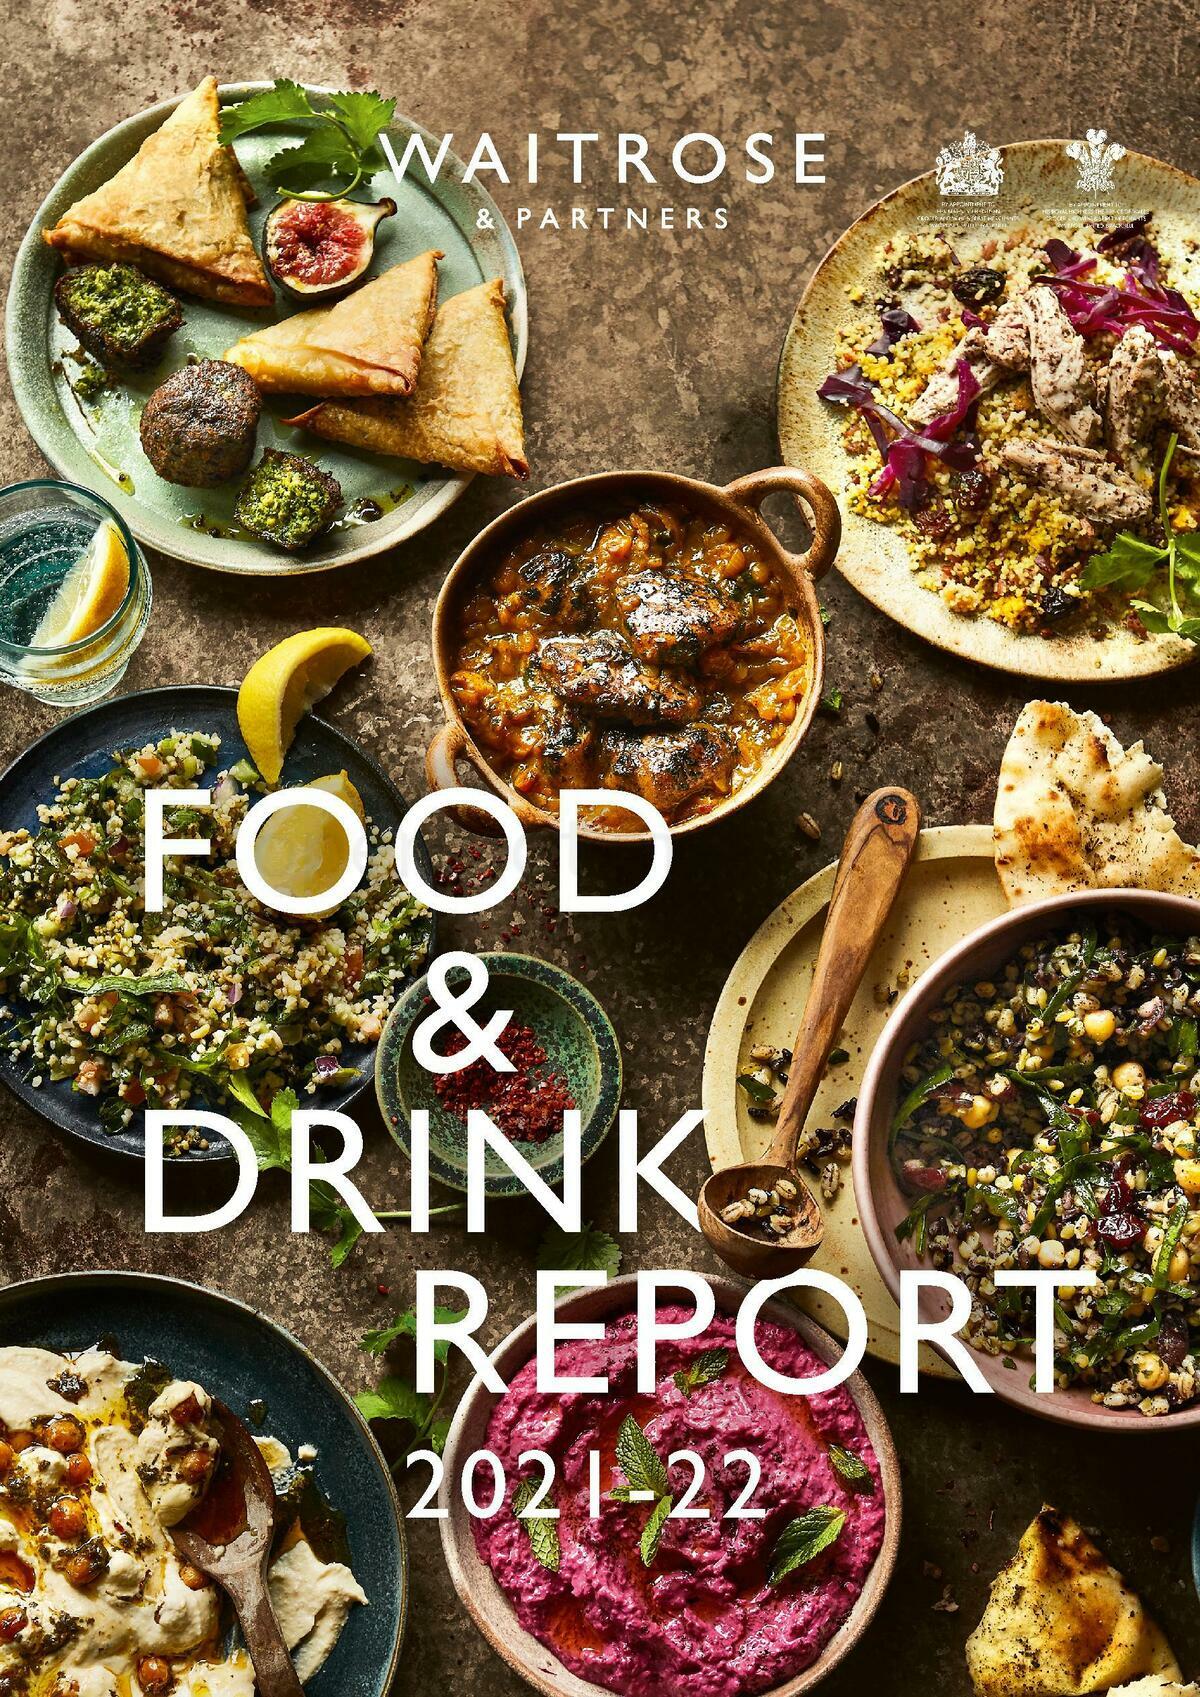 Waitrose Food & Drink Report 2021-22 Offers from 28 October